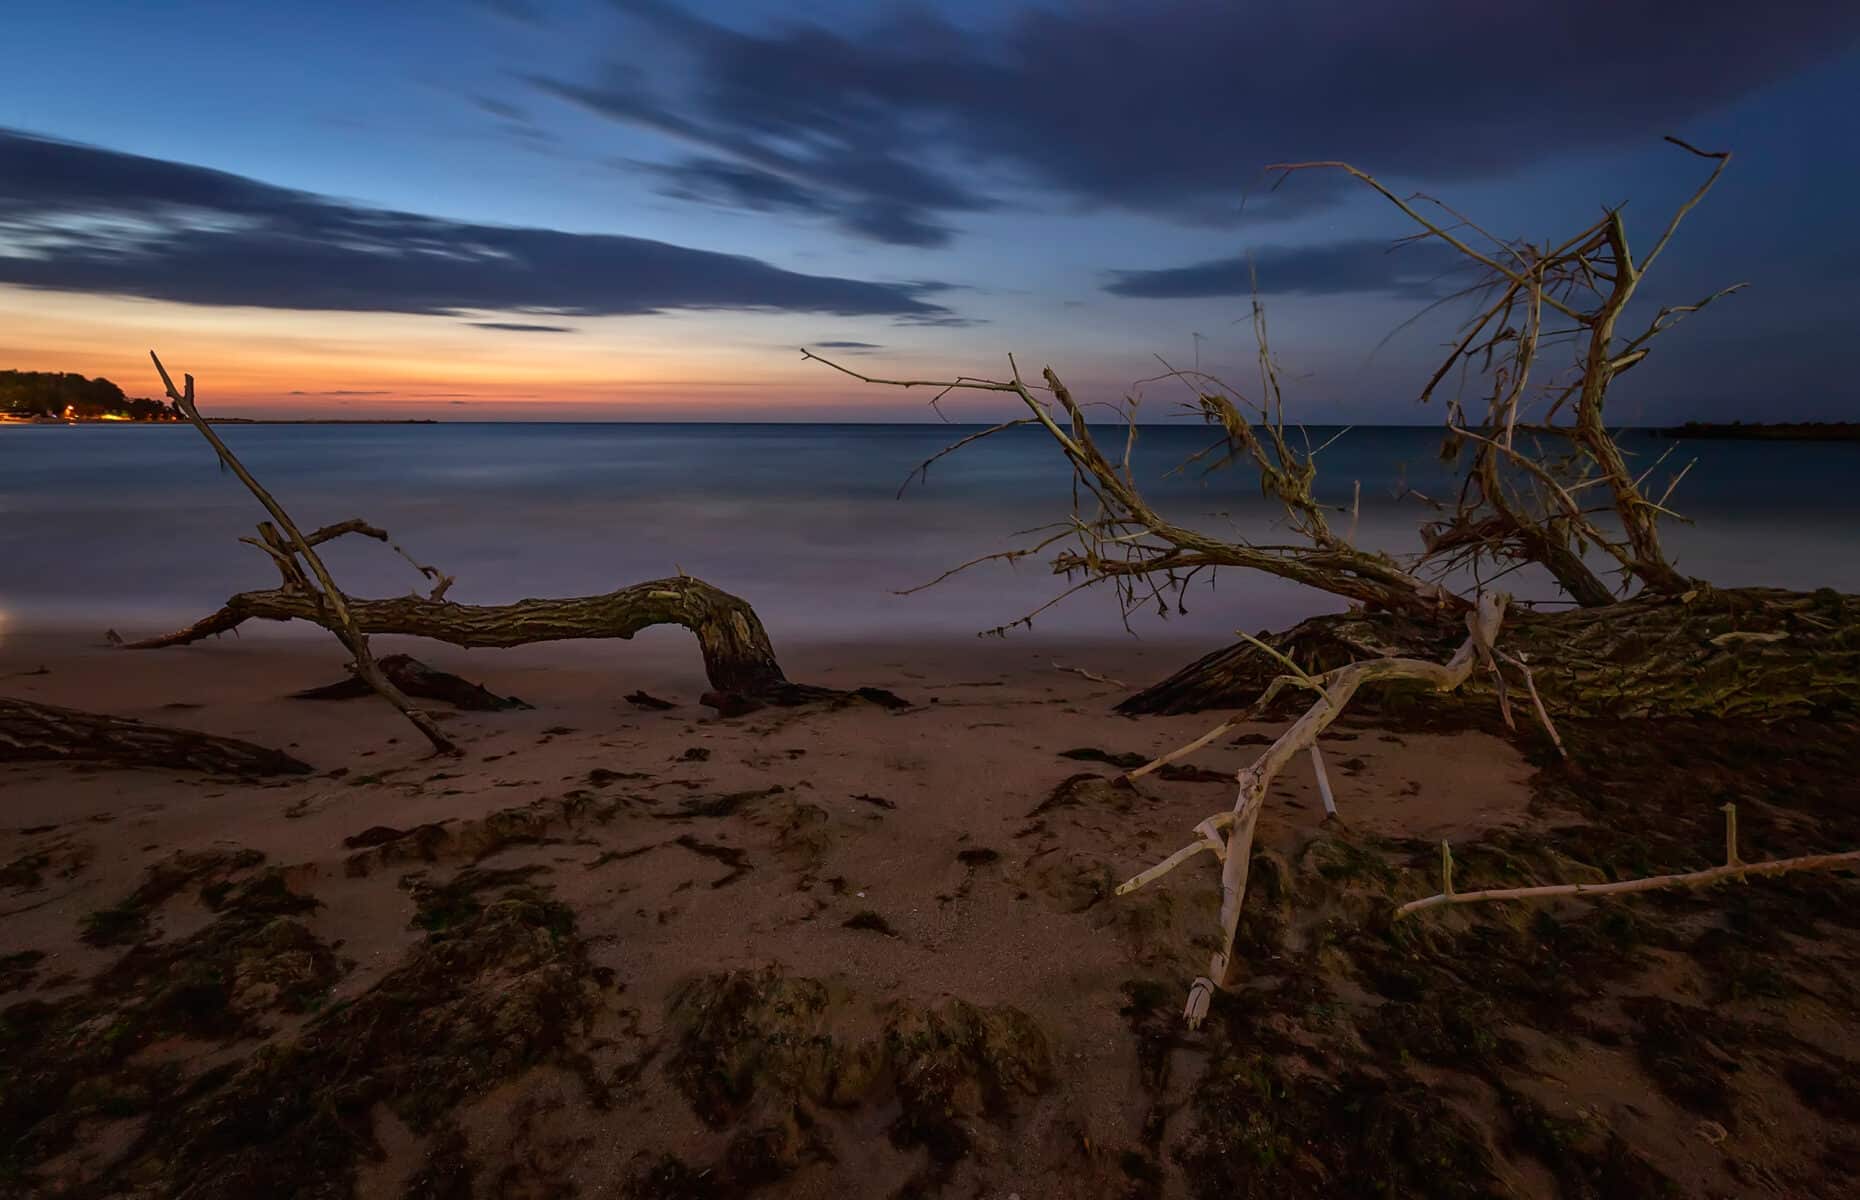 tree branches and roots on the beach. Mystic view